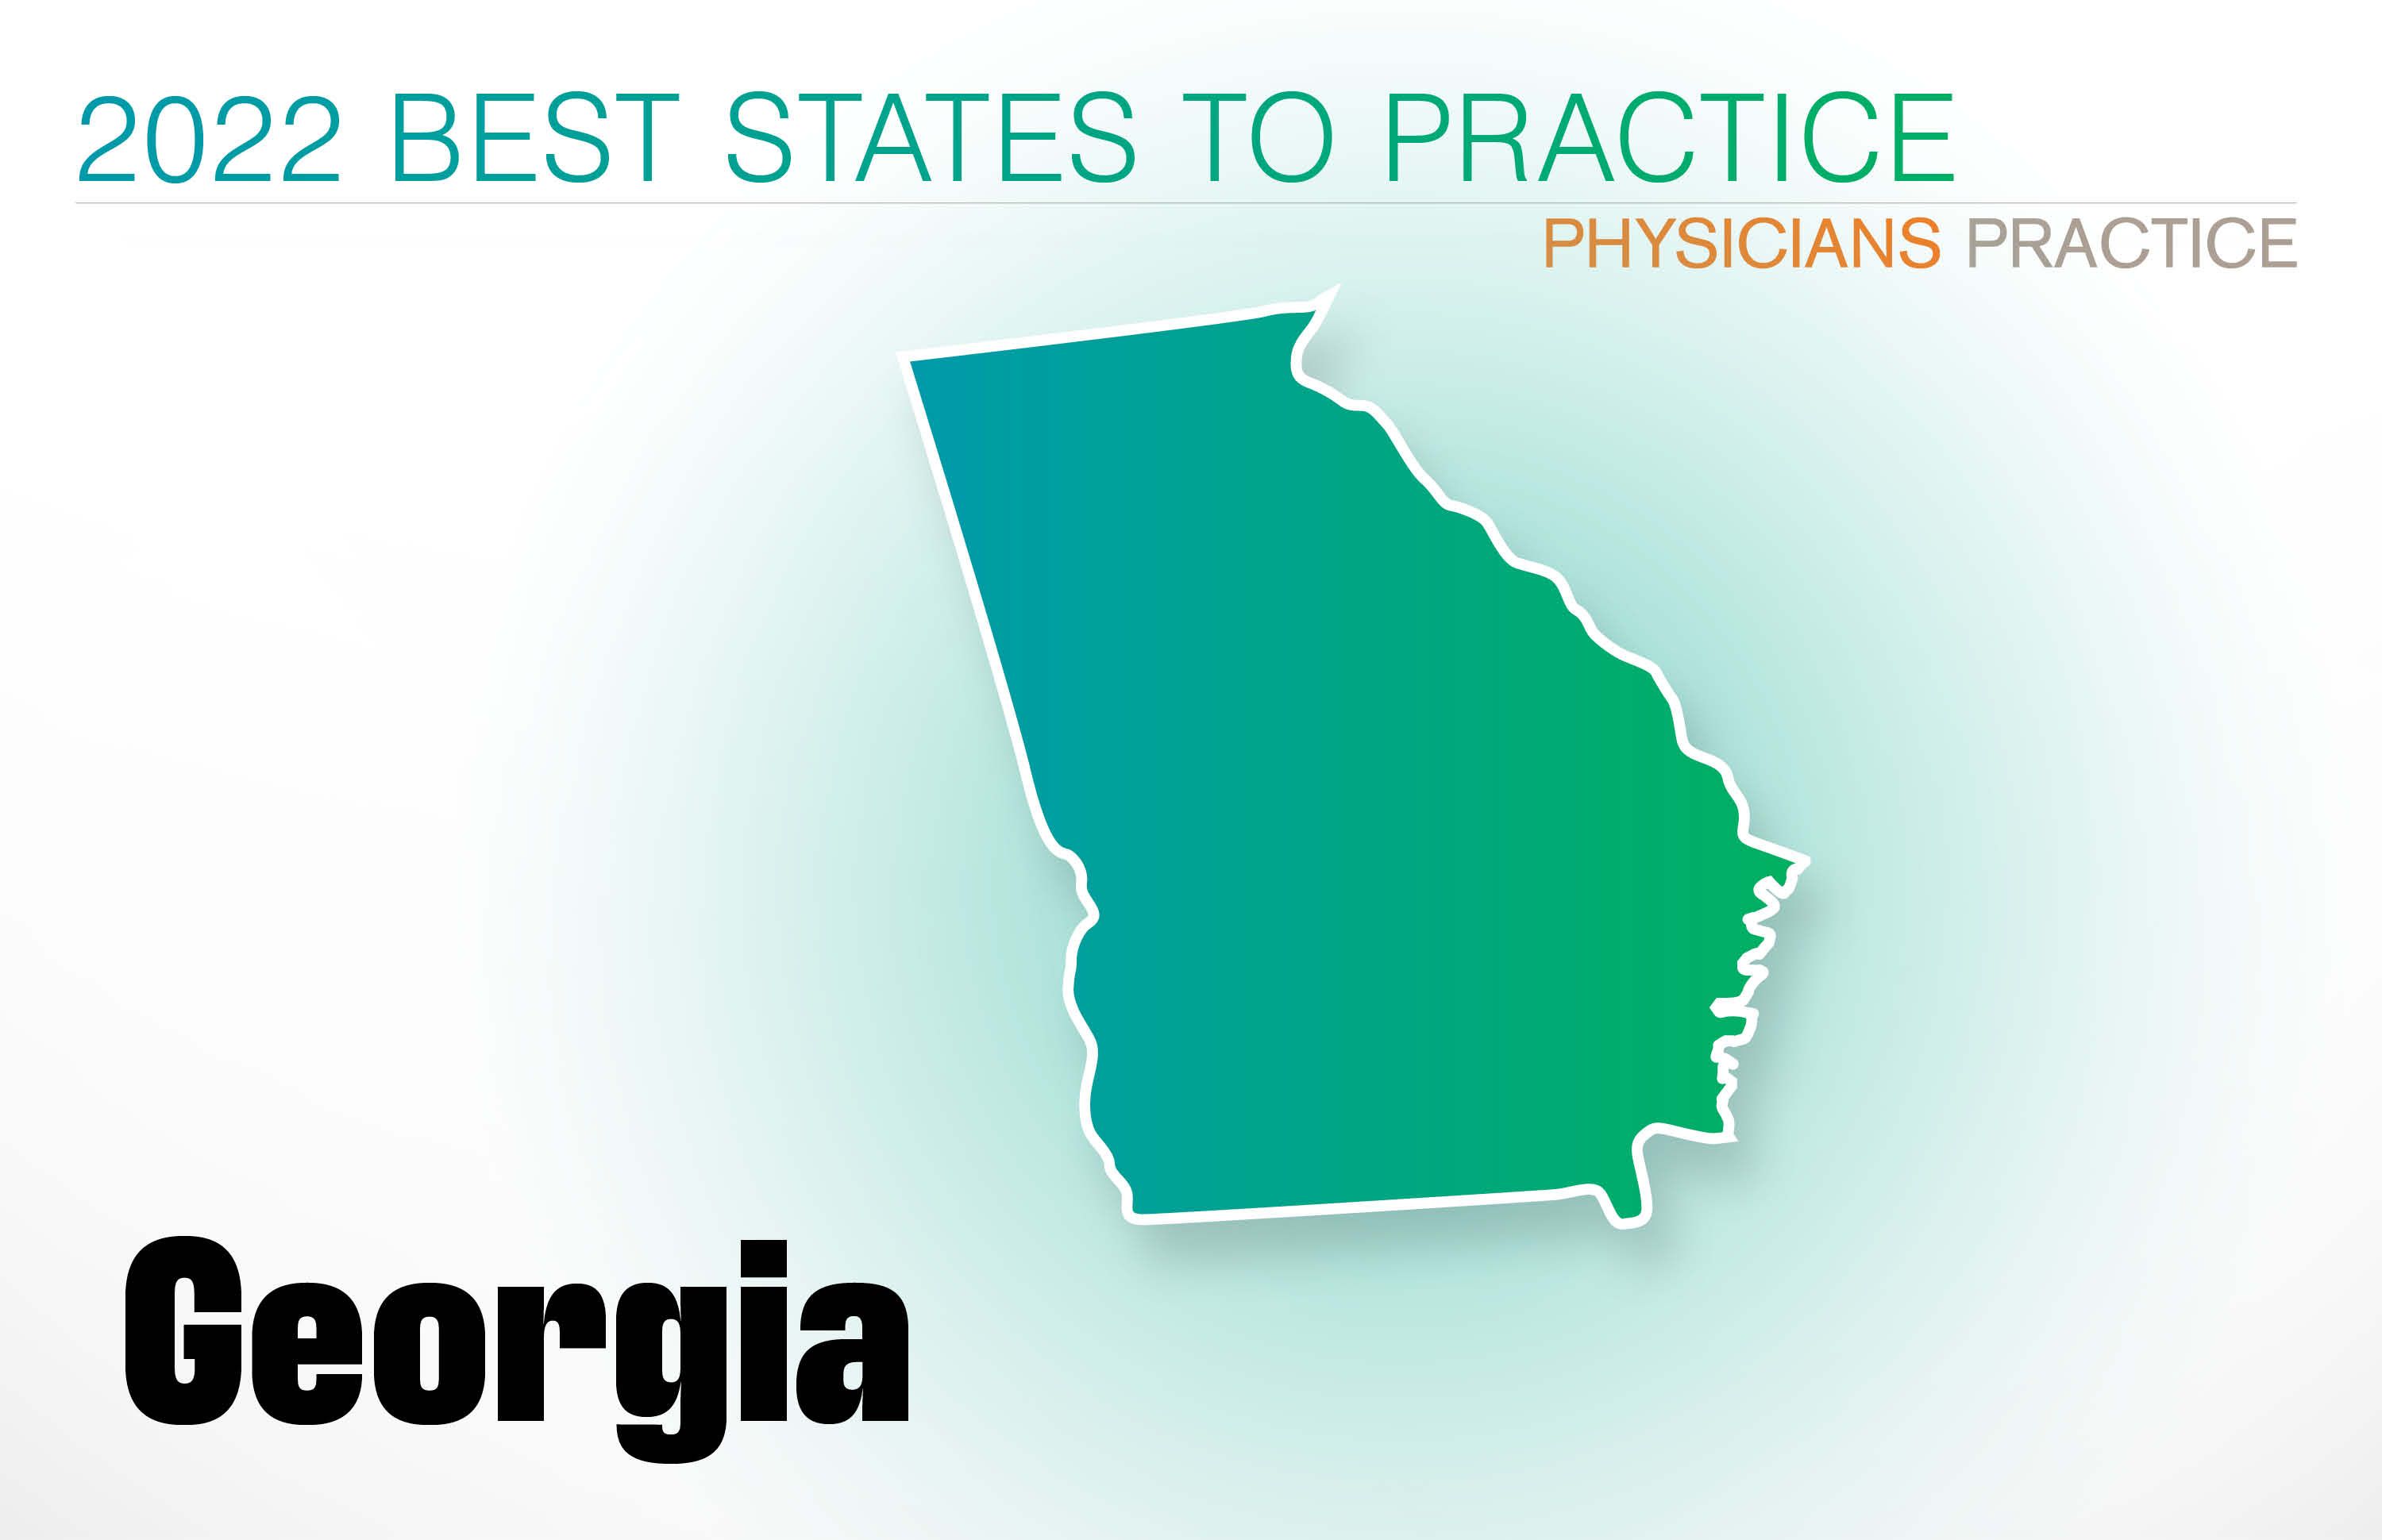 #26 Georgia Rankings: Cost of living: 6 Physician density: 13 Amount of state business taxes collected: 32 Average malpractice insurance rates: 30 Quality of life: 35 GPCI: 29